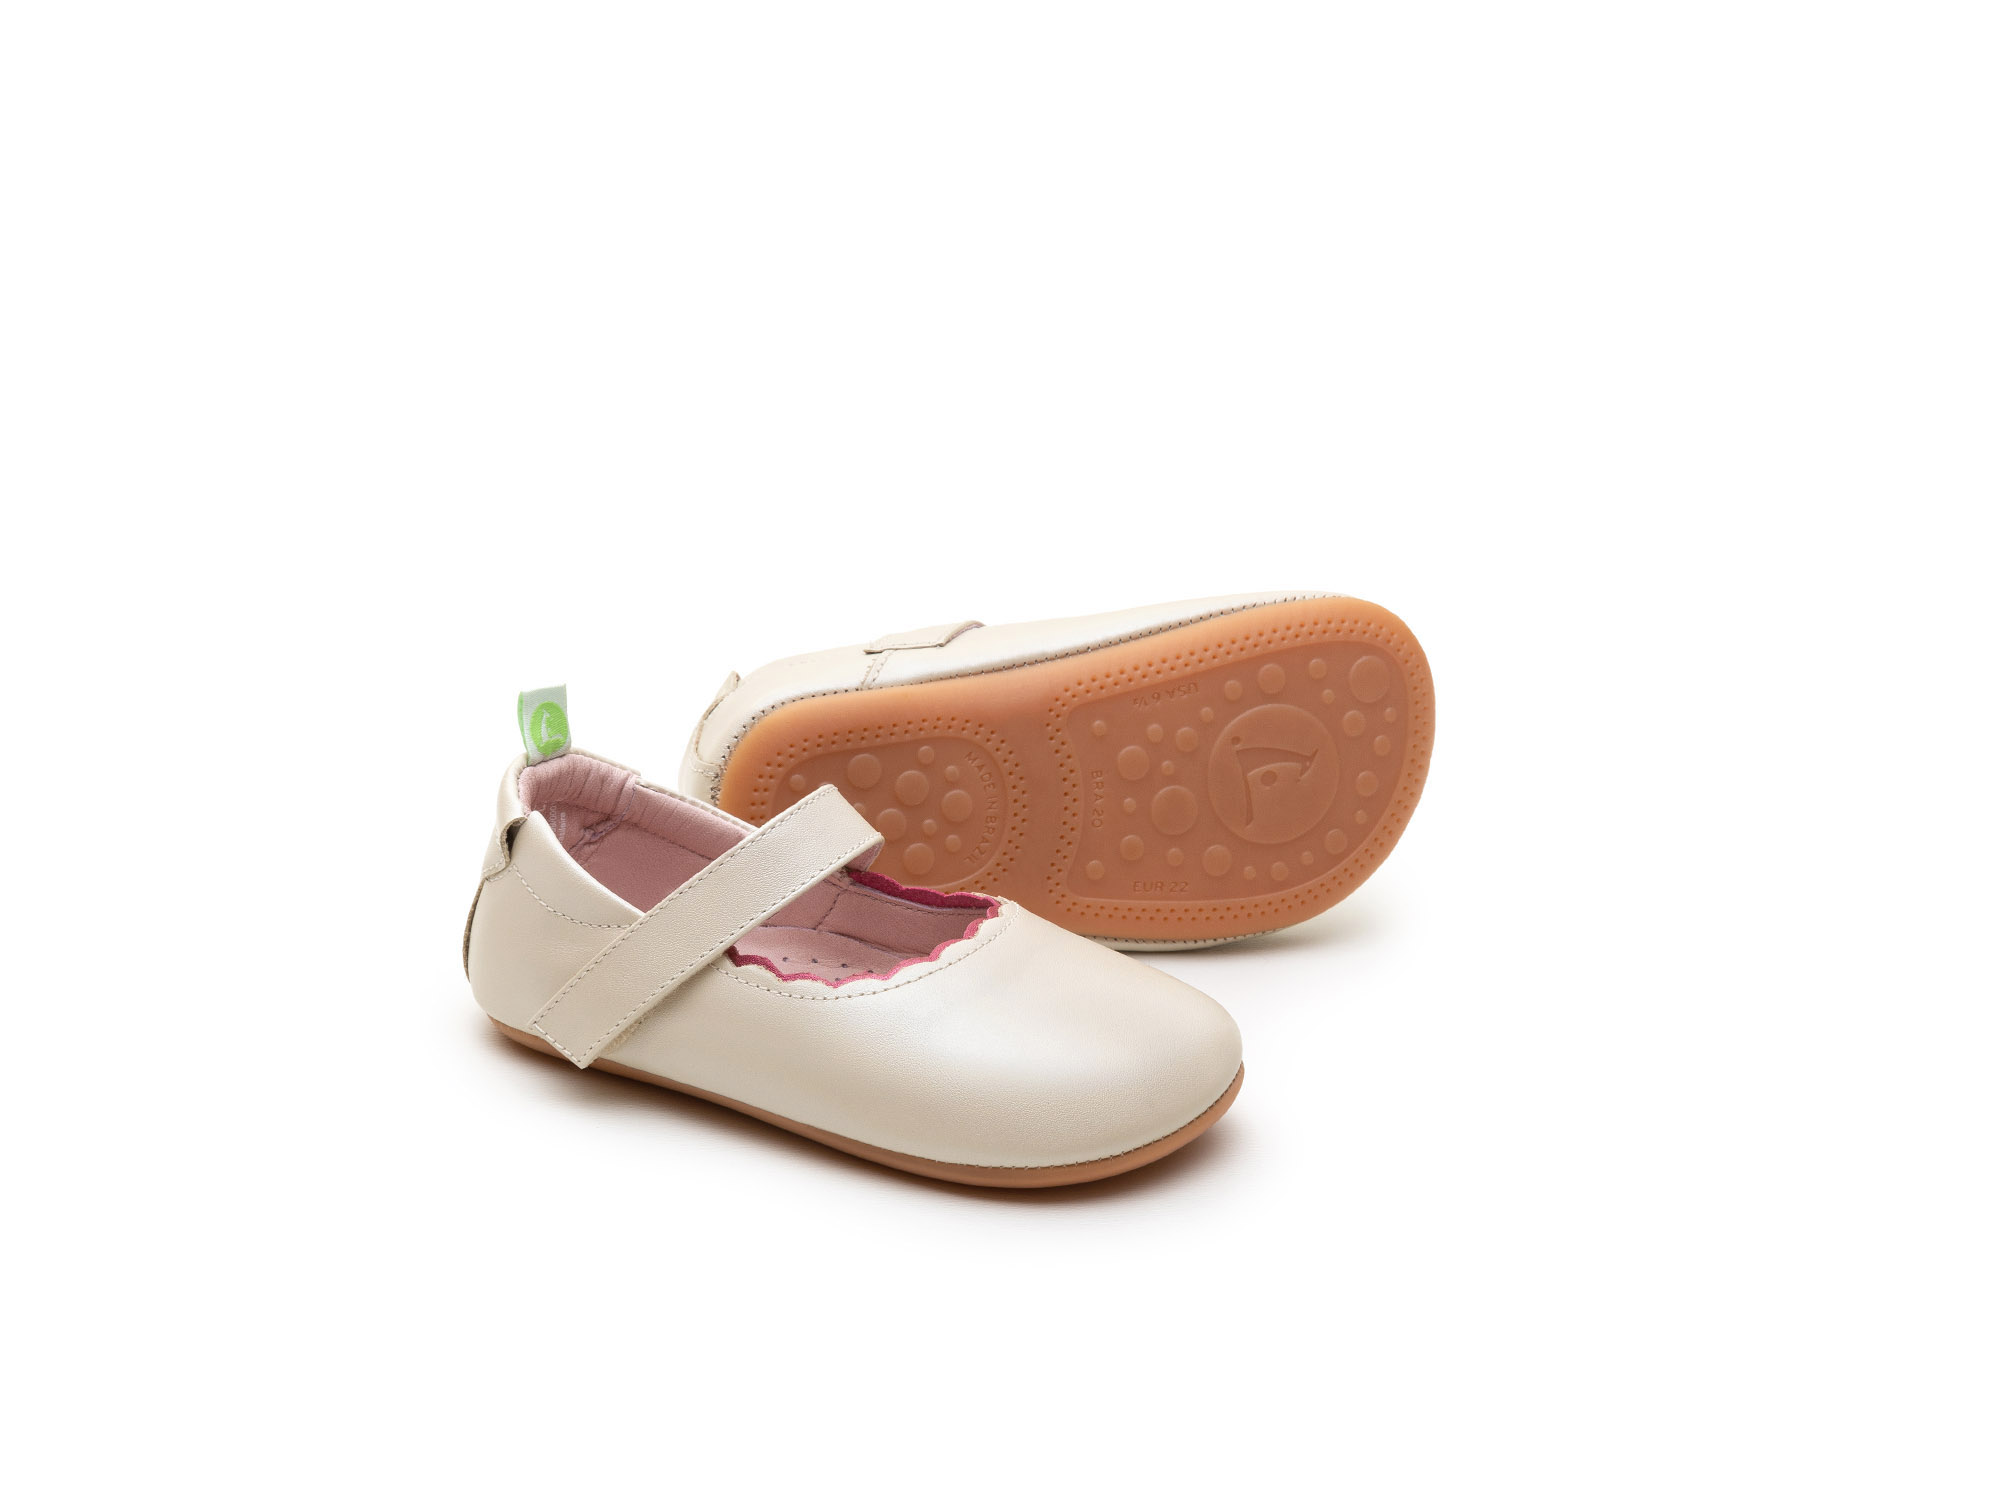 UP & GO Mary Janes for Girls Roundy | Tip Toey Joey - Australia - 0